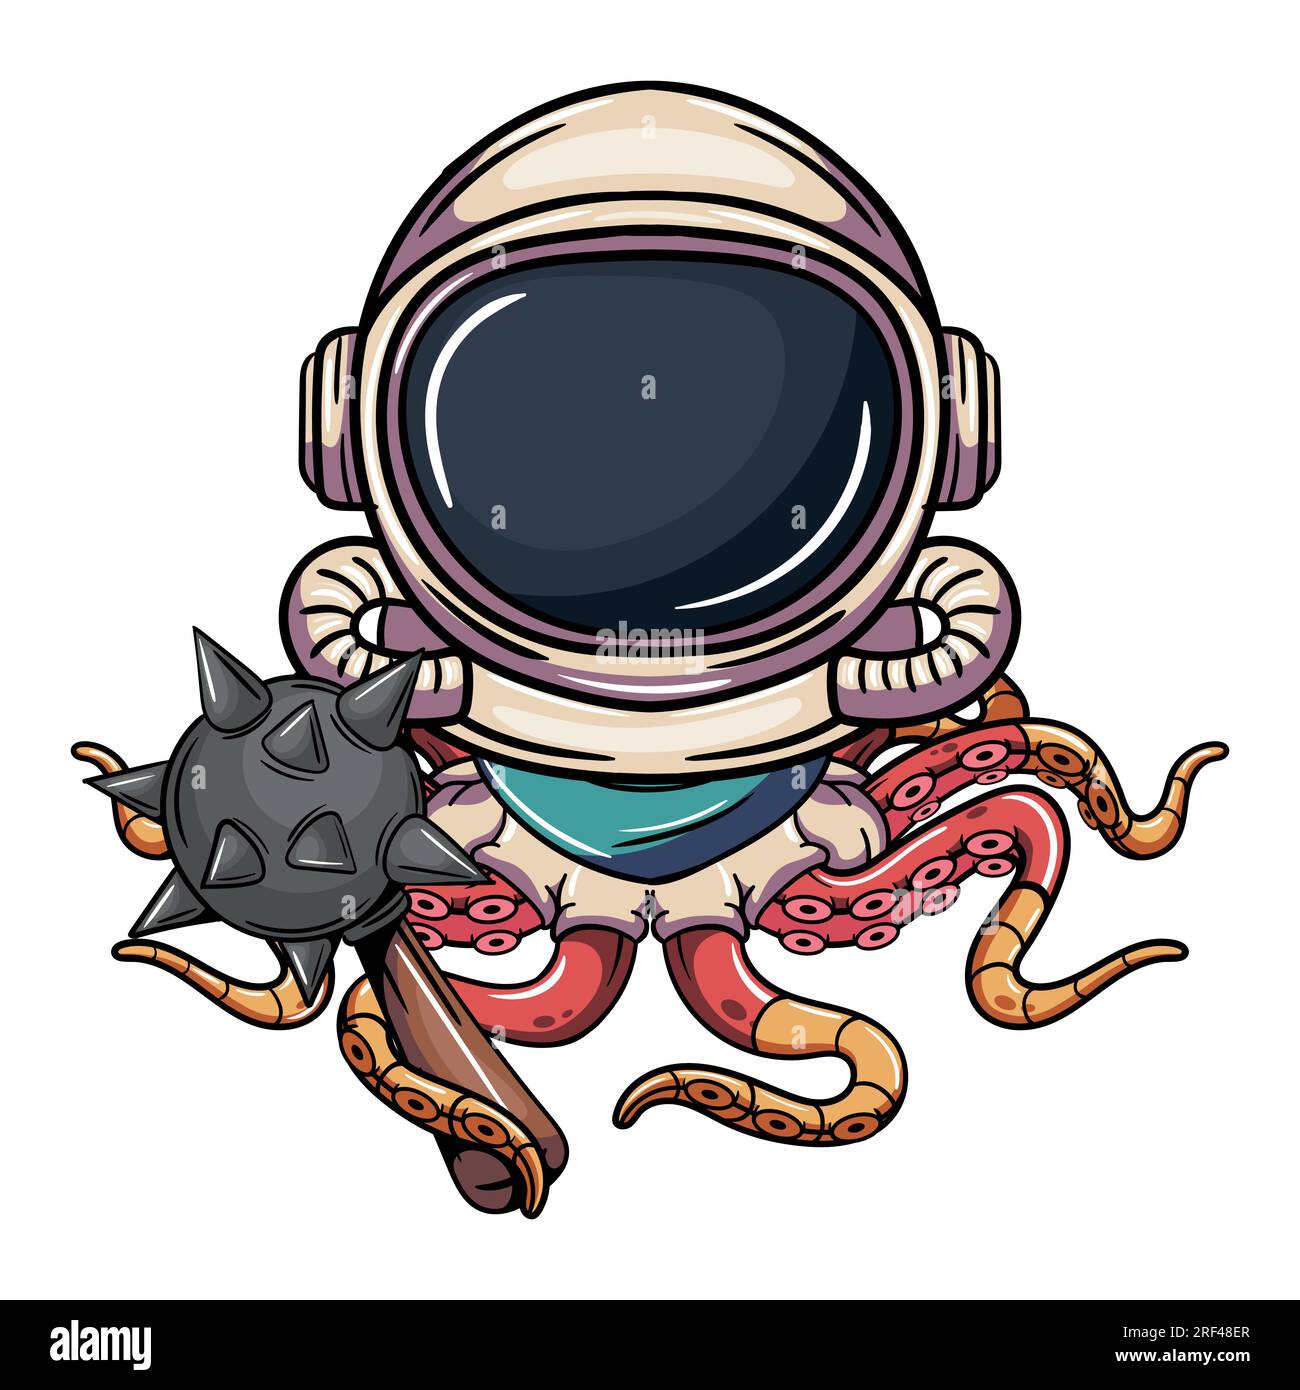 Cartoon comic character octopus cyborg astronaut with space suit and a war mace. Illustration for fantasy, science fiction and adventure comics Stock Vector